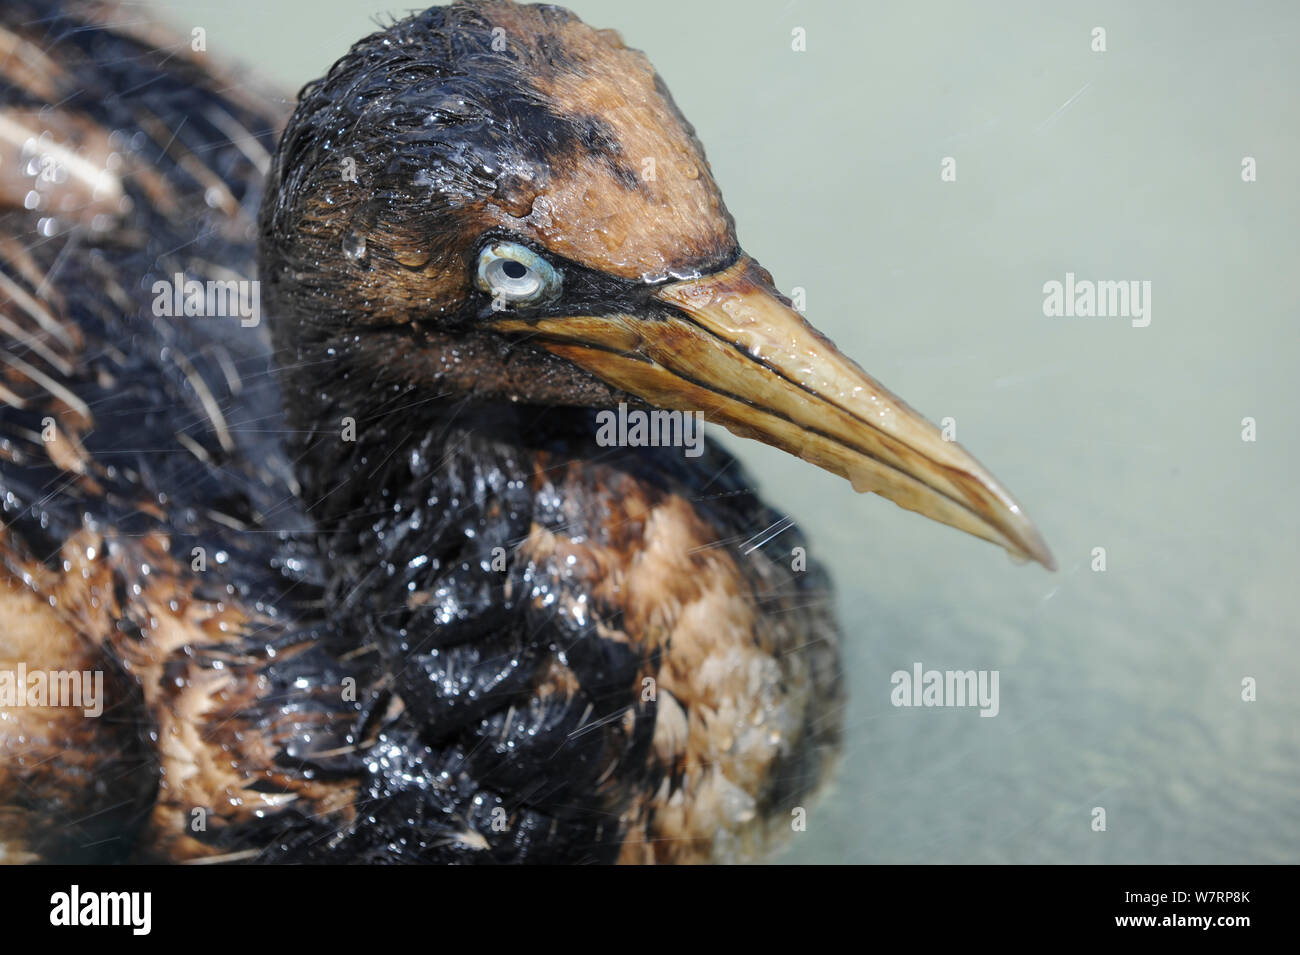 Cape gannet (Morus capensis) covered in oil swimming in SANCCOB pool, during rehabilitation at the Southern African Foundation for the Conservation of Coastal Birds (SANCCOB) South Africa, November 2011 Stock Photo